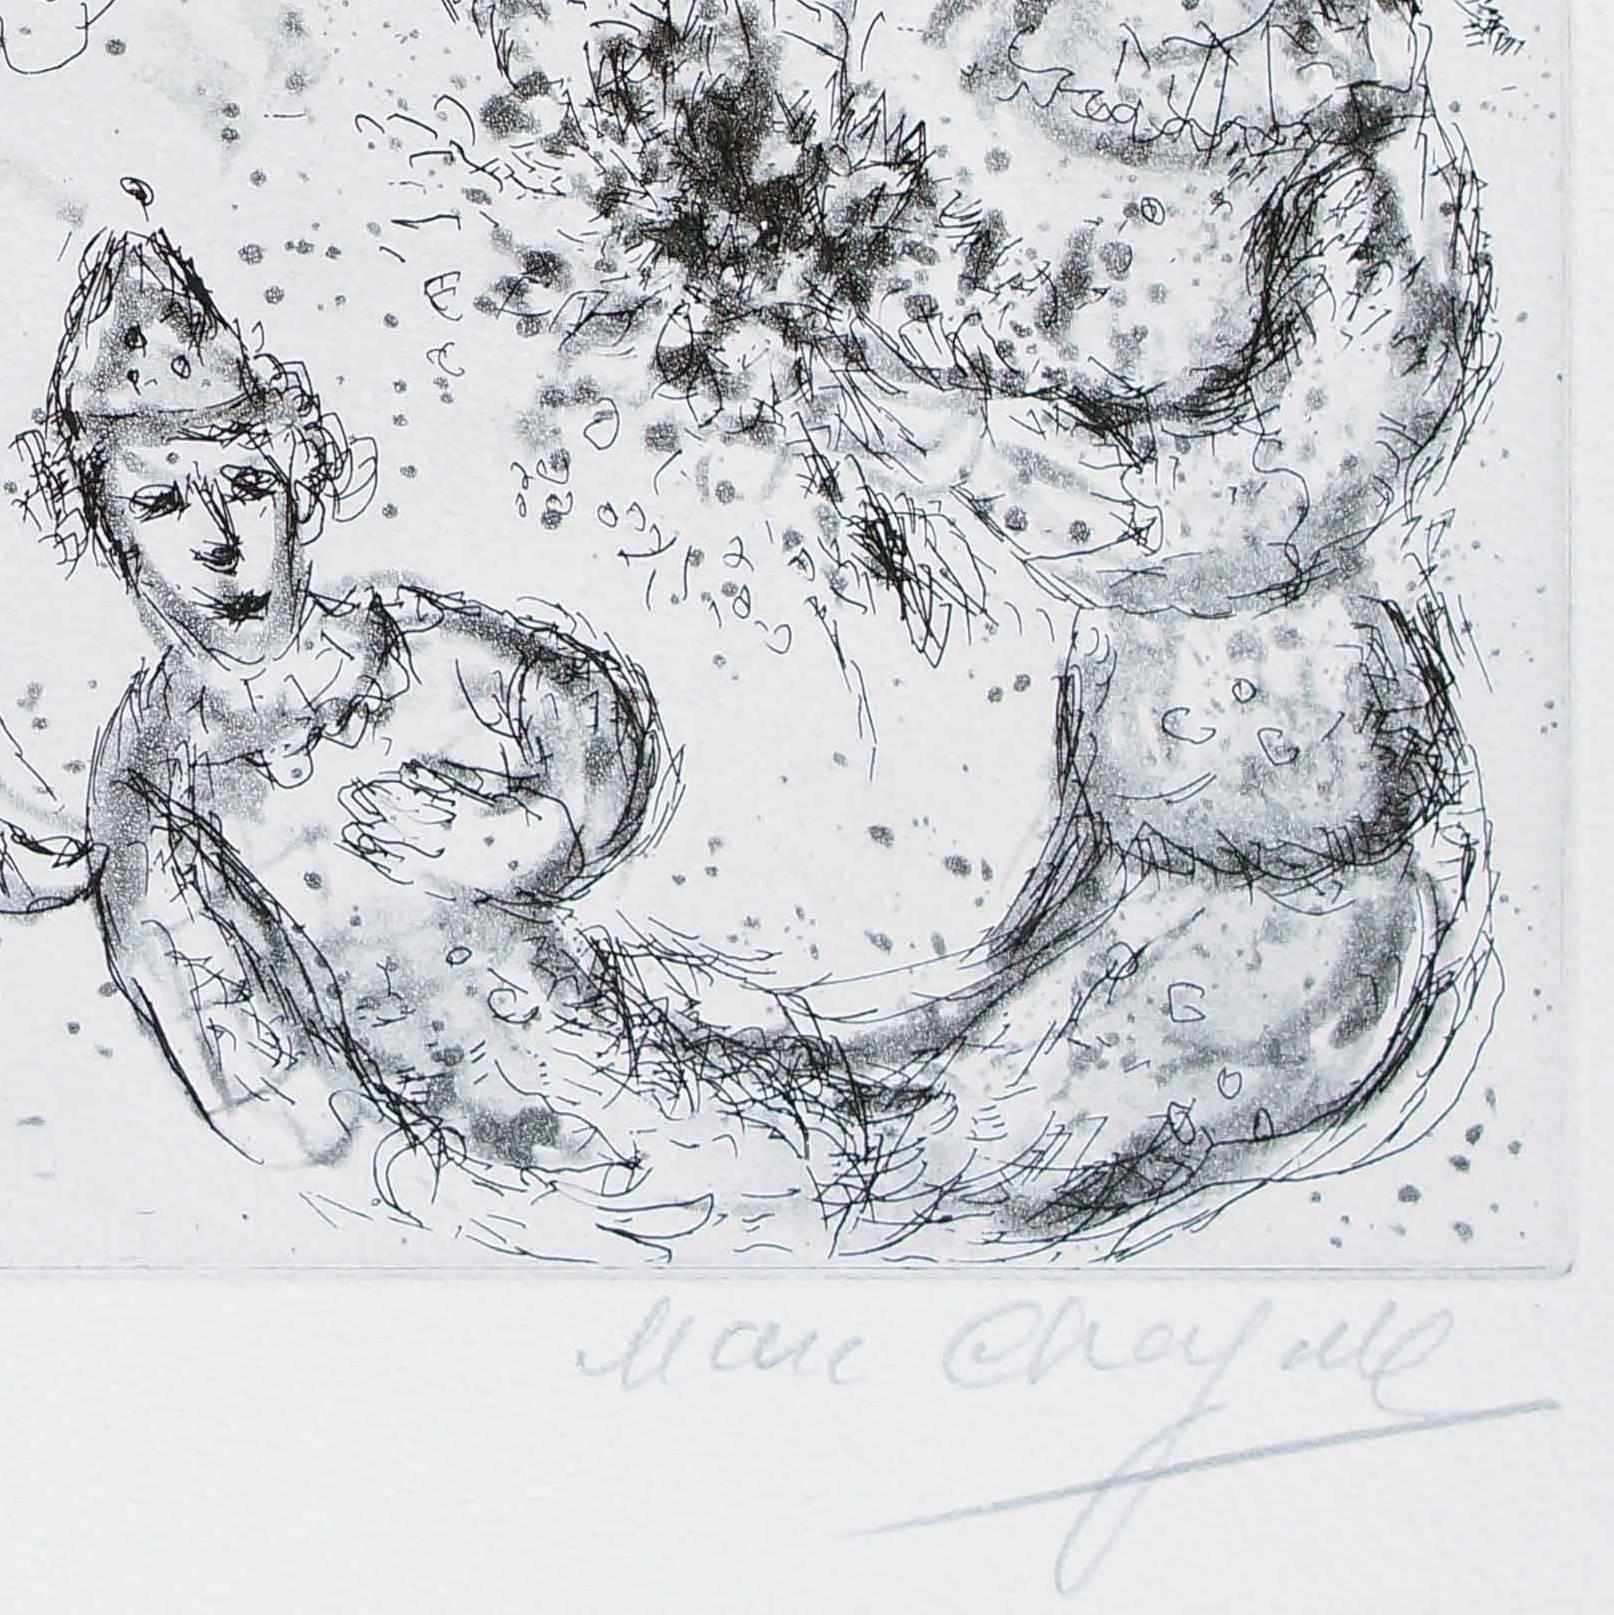 Hand signed and numbered. Edition of 35 prints.
Rare and precious artwork by Chagall, in excellent conditions.
Ref. Cat. Cramer, n. 32
Image dimensions : 30.5 x 24 cm